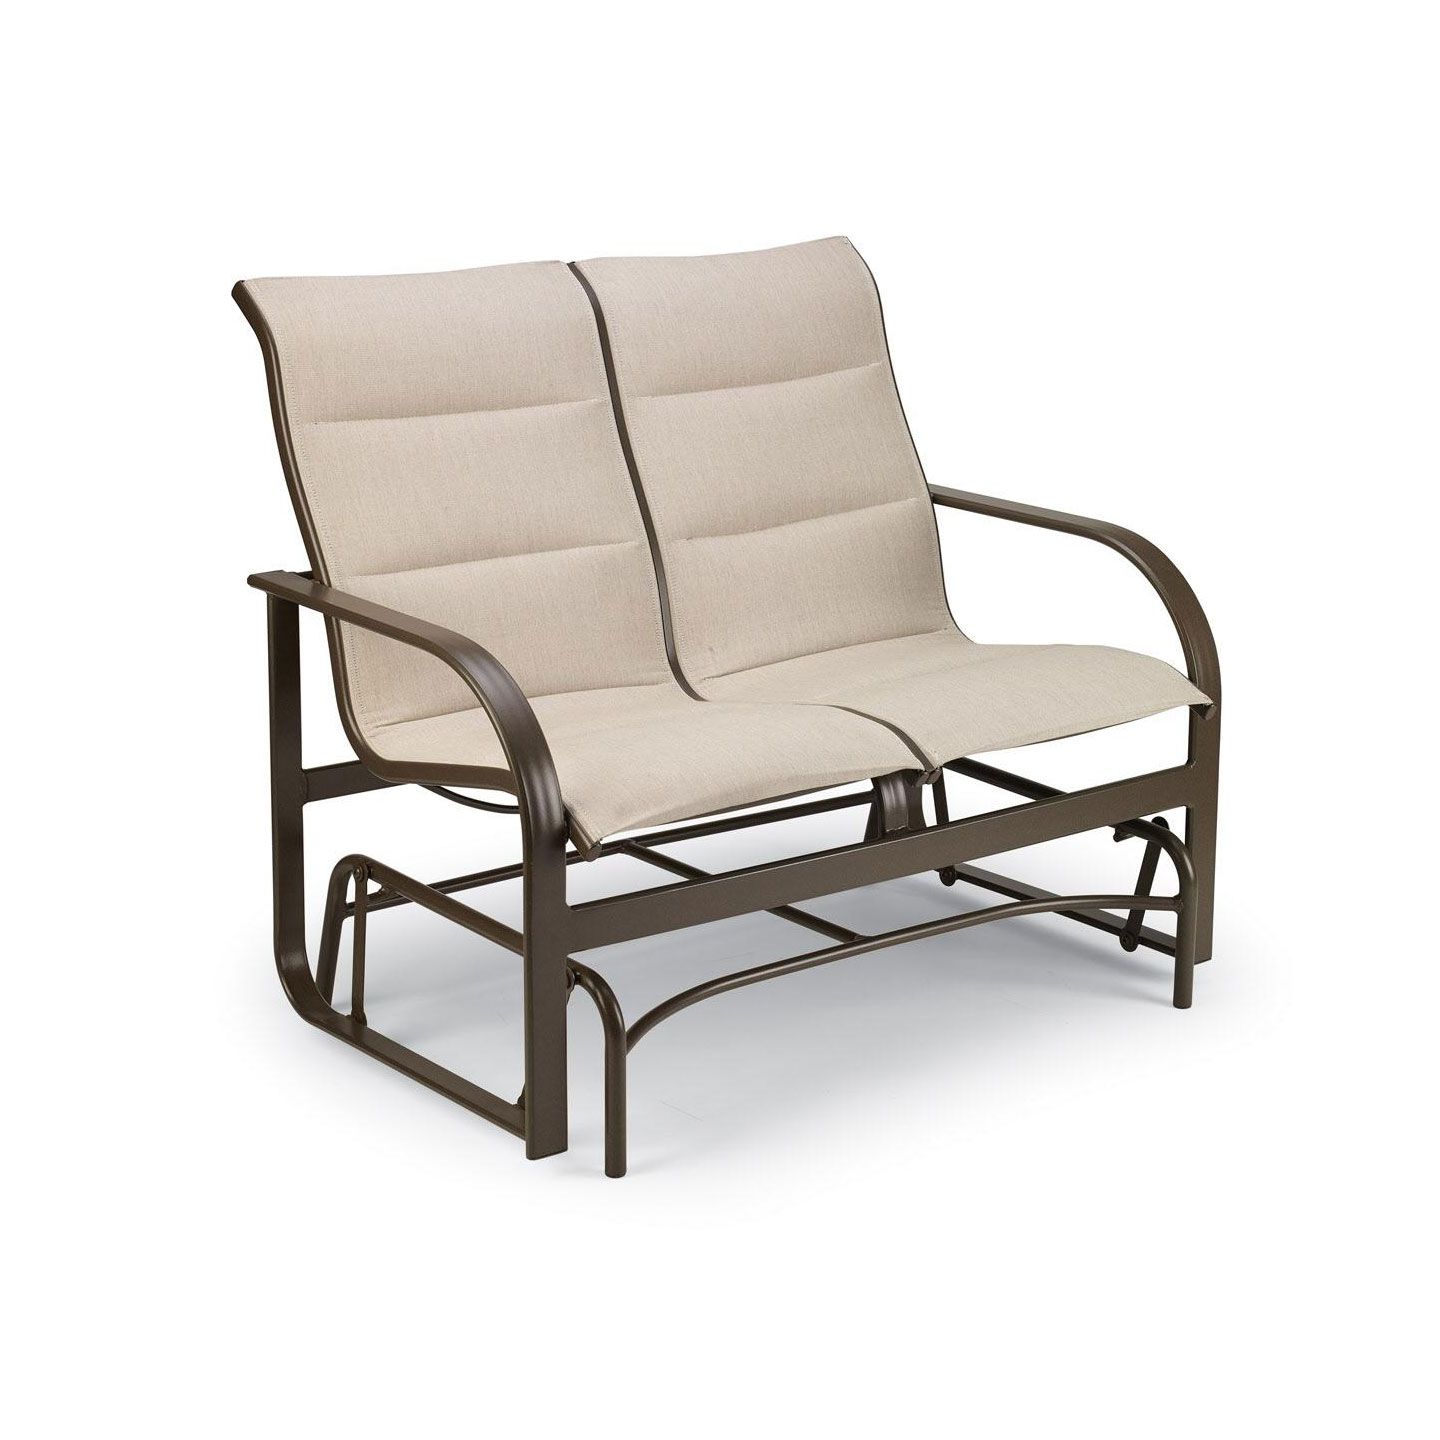 Winston Key West Padded Sling Loveseat Glider Outdoor Within Loveseat Glider Benches (View 24 of 25)